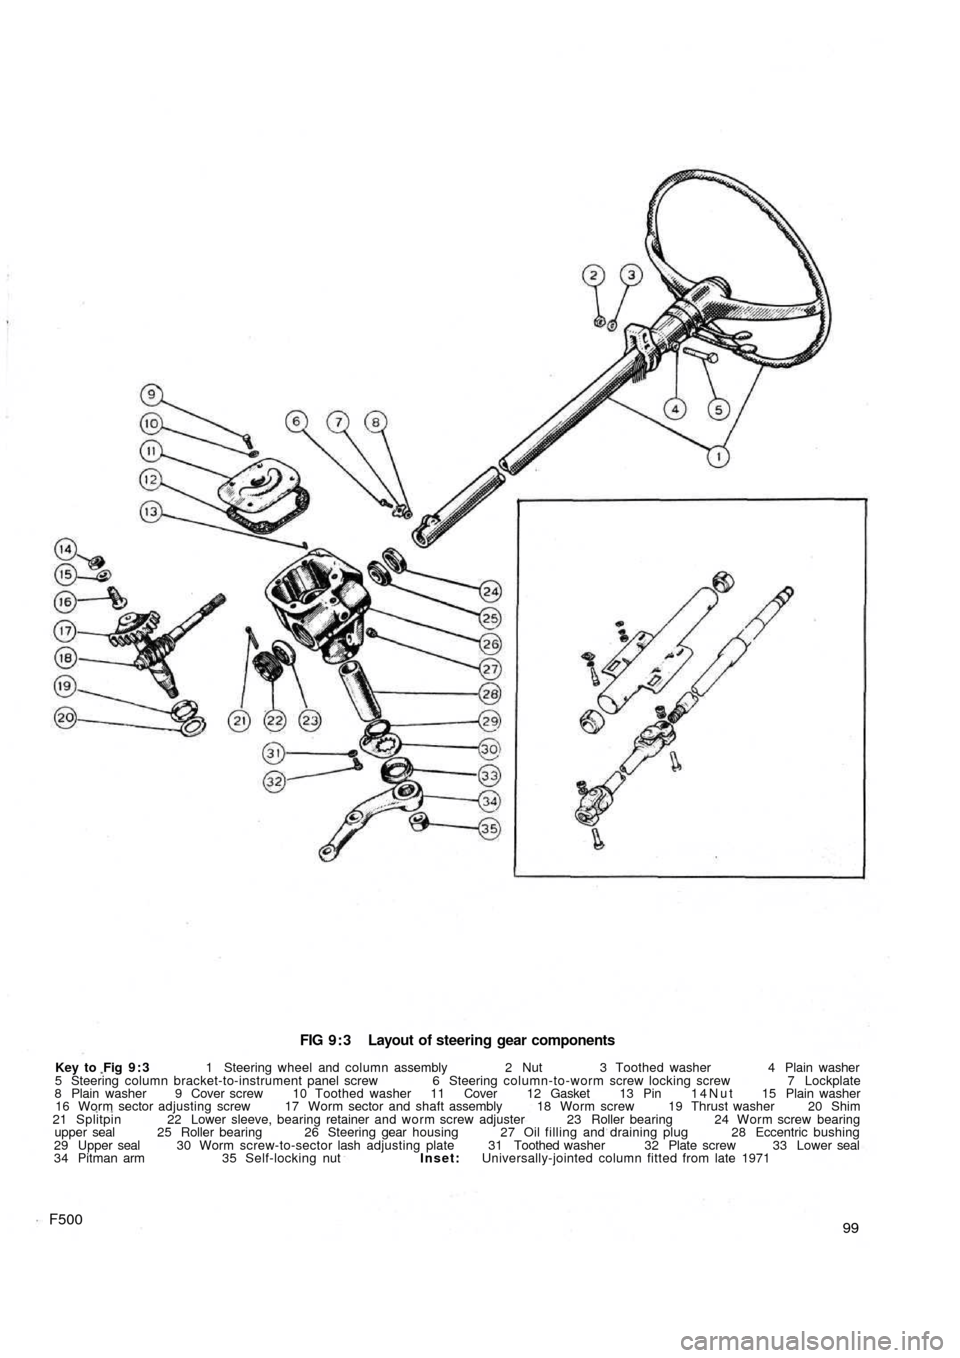 FIAT 500 1964 1.G Workshop Manual FIG 9 : 3  Layout of steering gear components
Key to  Fig 9 : 3 1 Steering wheel and column assembly 2 Nut 3 Toothed washer 4 Plain washer
5 Steering column bracket-to-instrument panel screw 6 Steerin